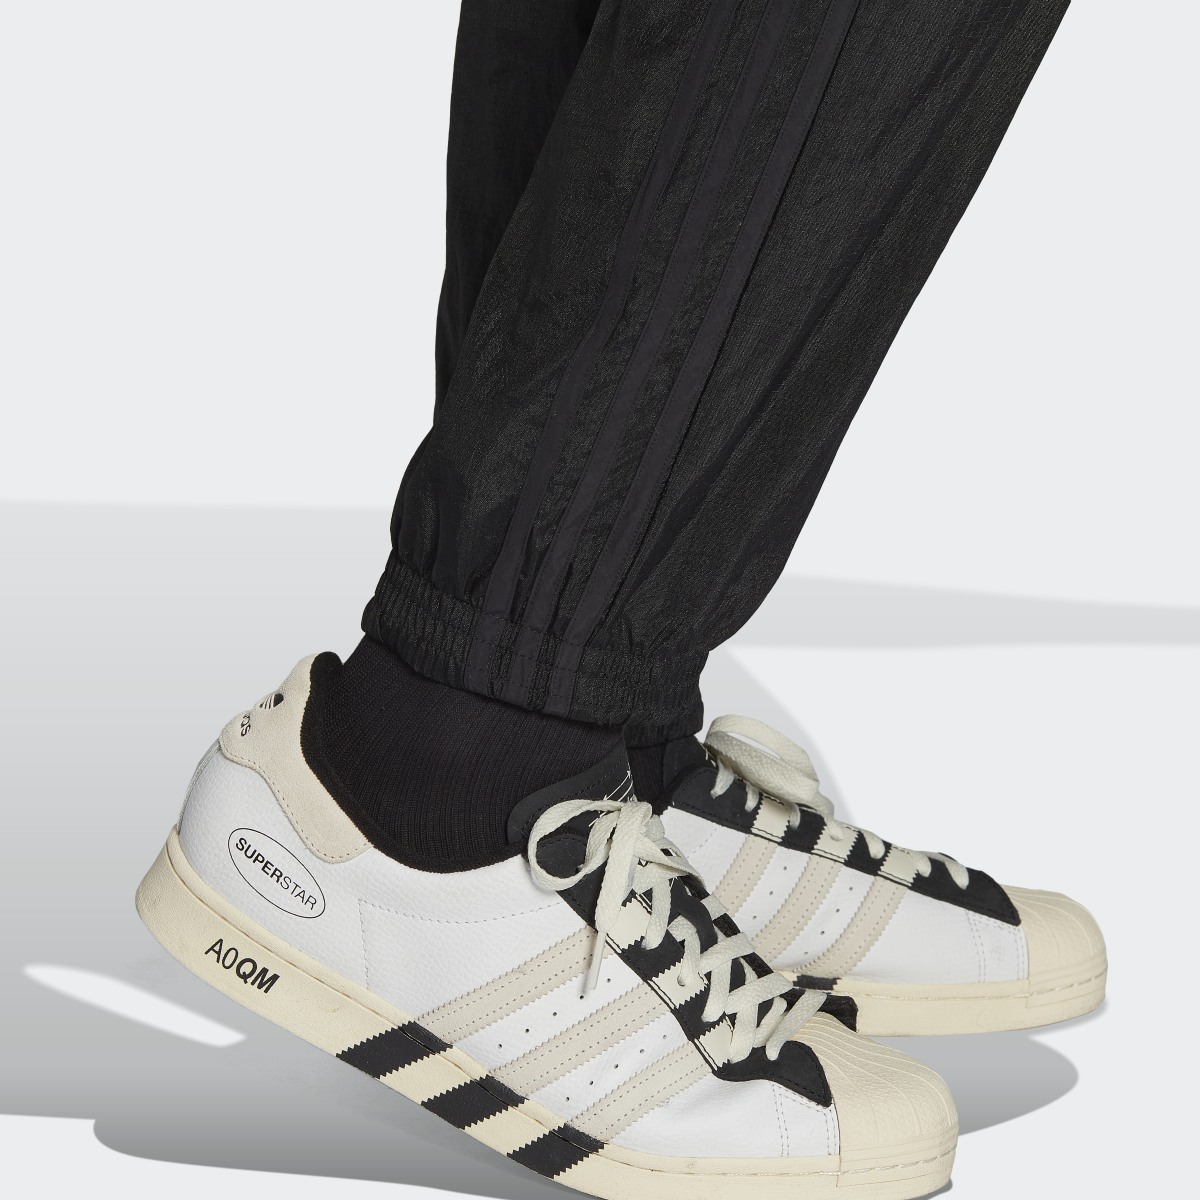 Adidas Reveal Material Mix Tracksuit Bottoms. 5